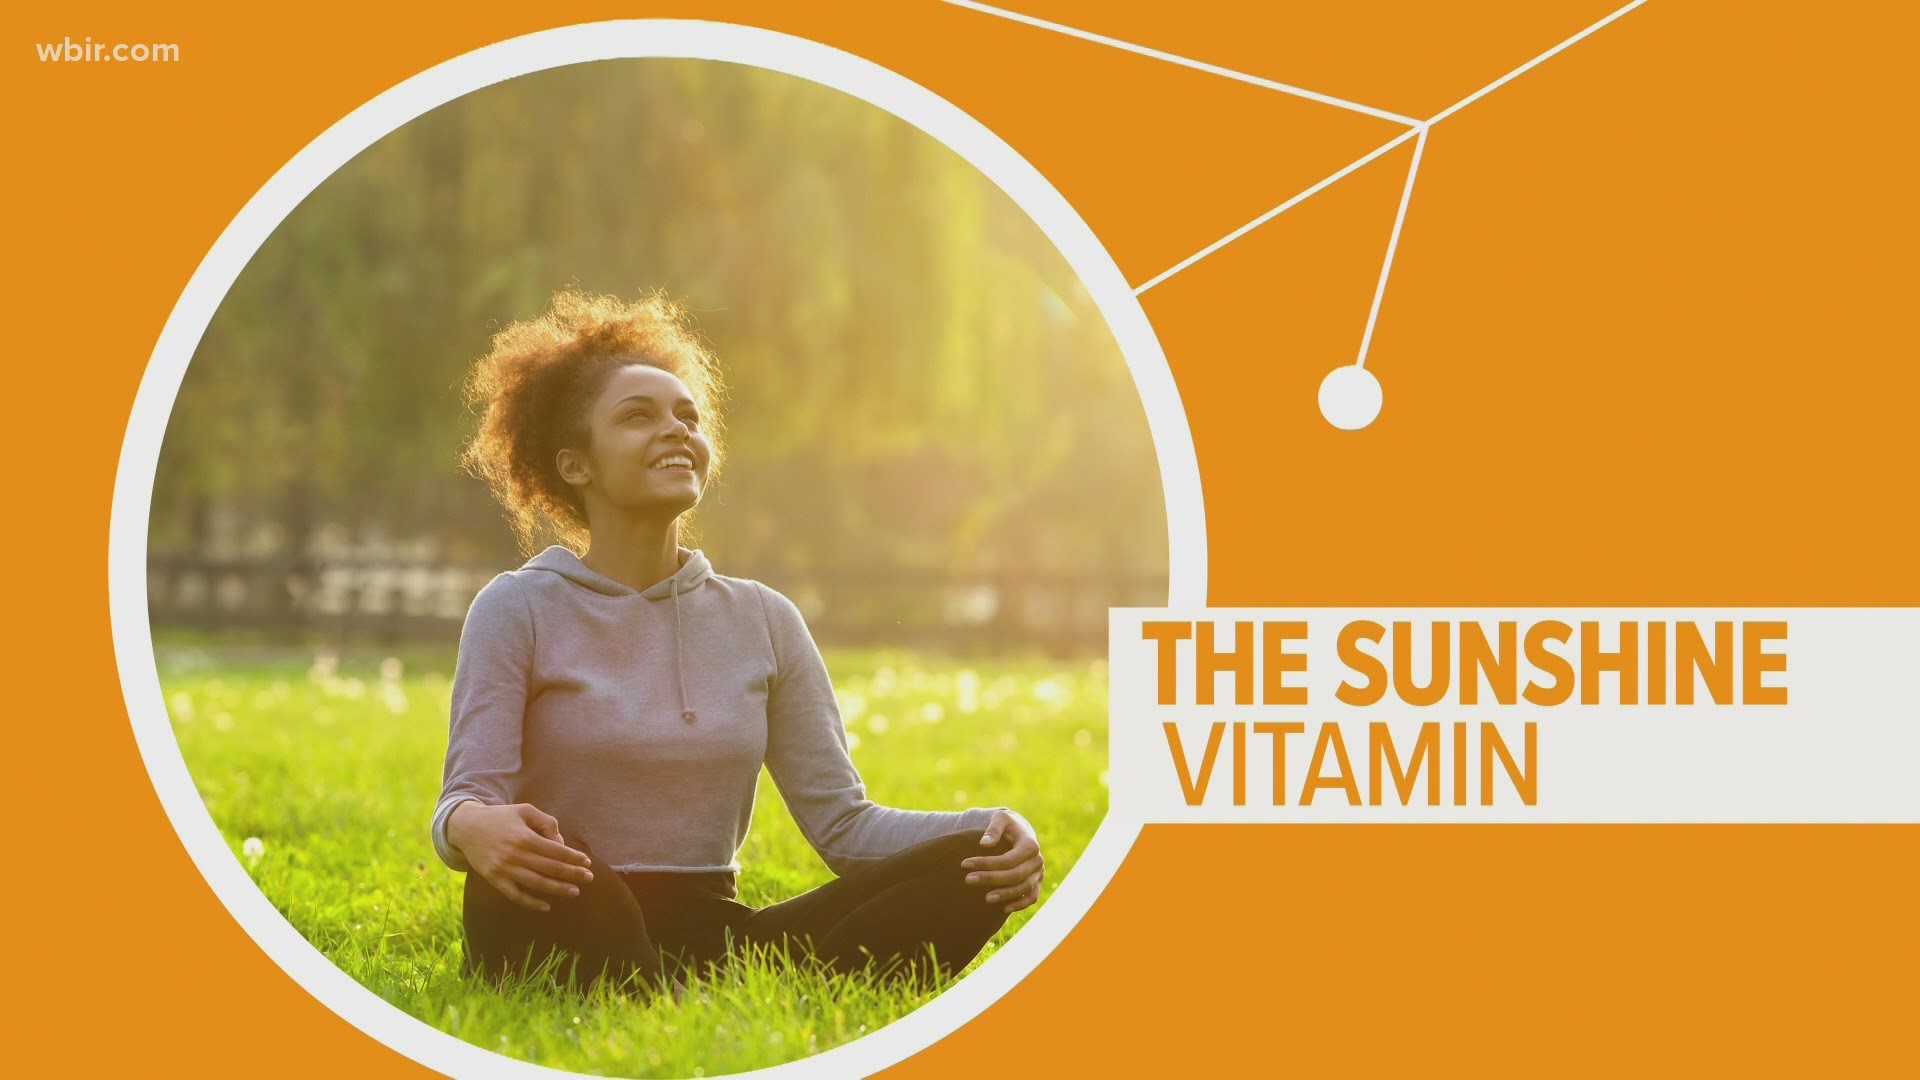 It's called the sunshine vitamin and new research shows Vitamin D's impact on our odds of getting COVID-19.